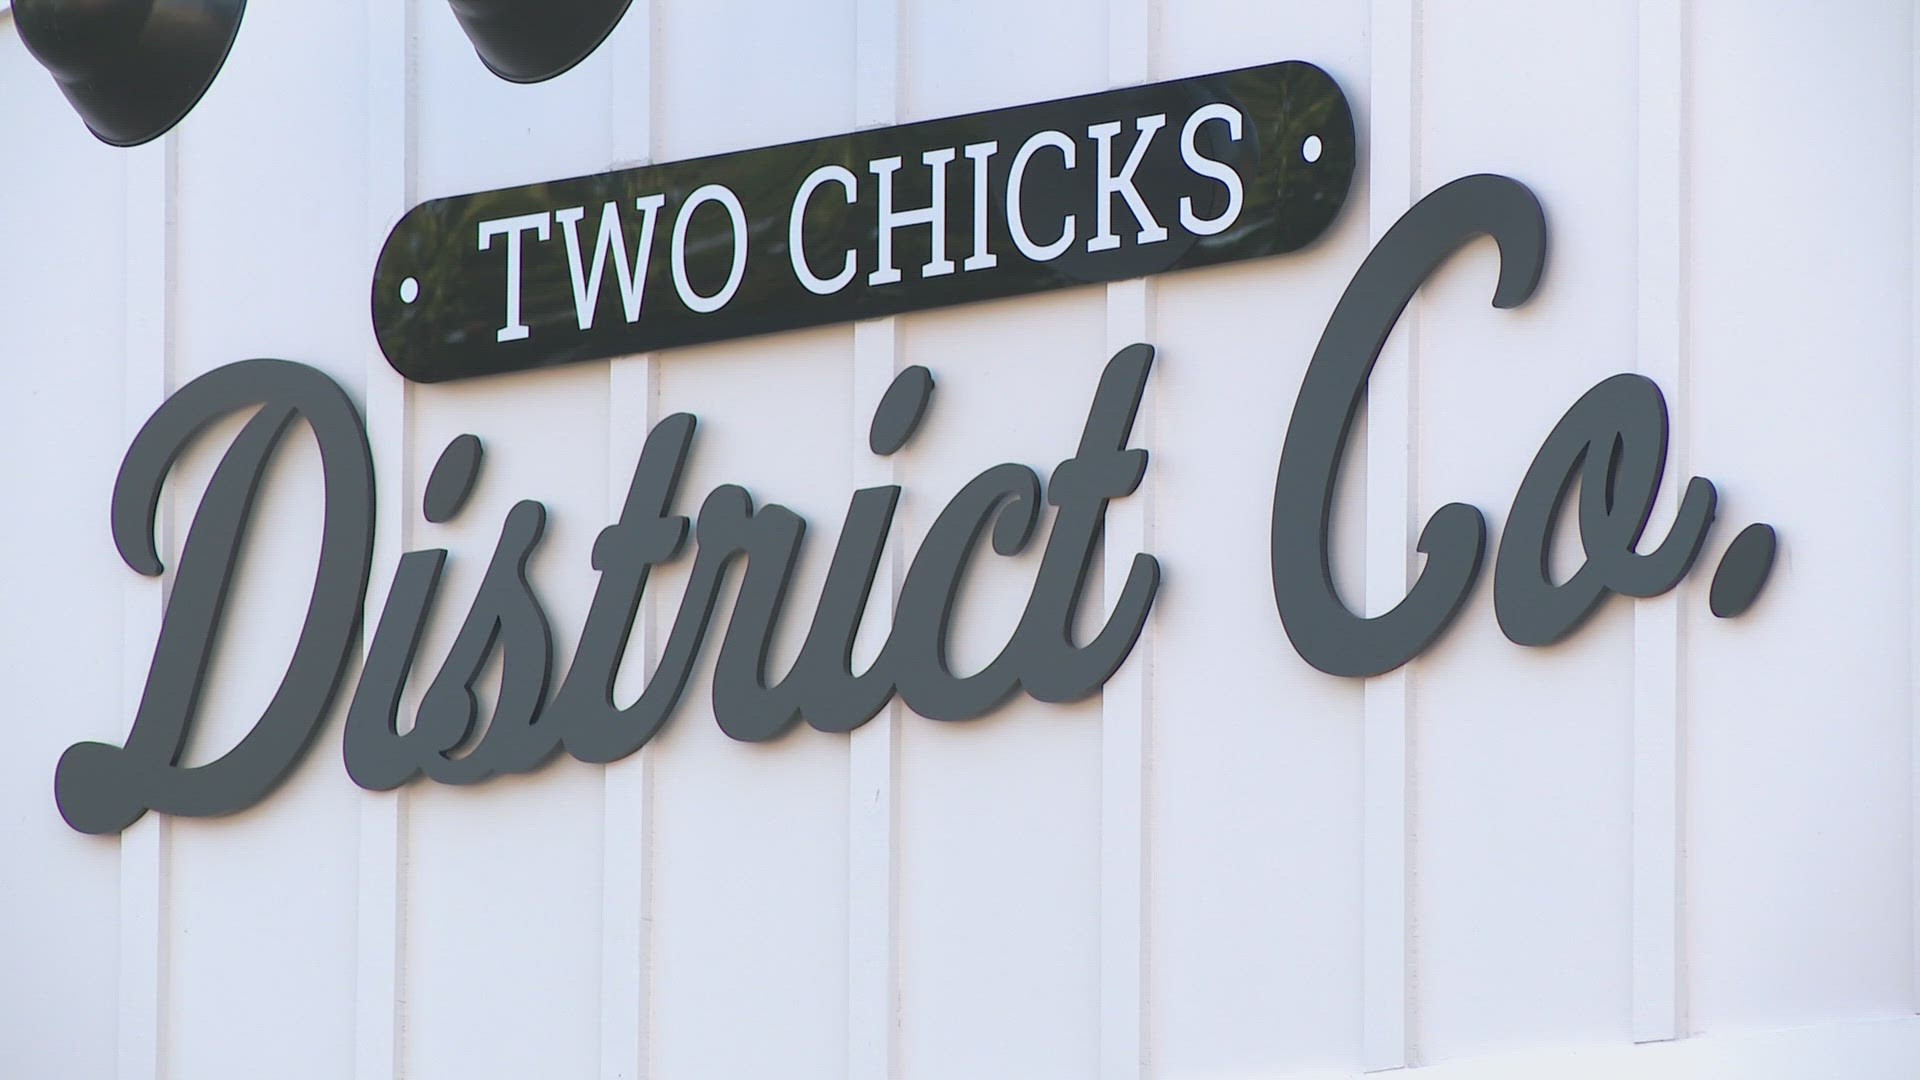 Two Chicks and a Hammer will close their store in the Bates-Hendricks neighborhood at the end of the year.